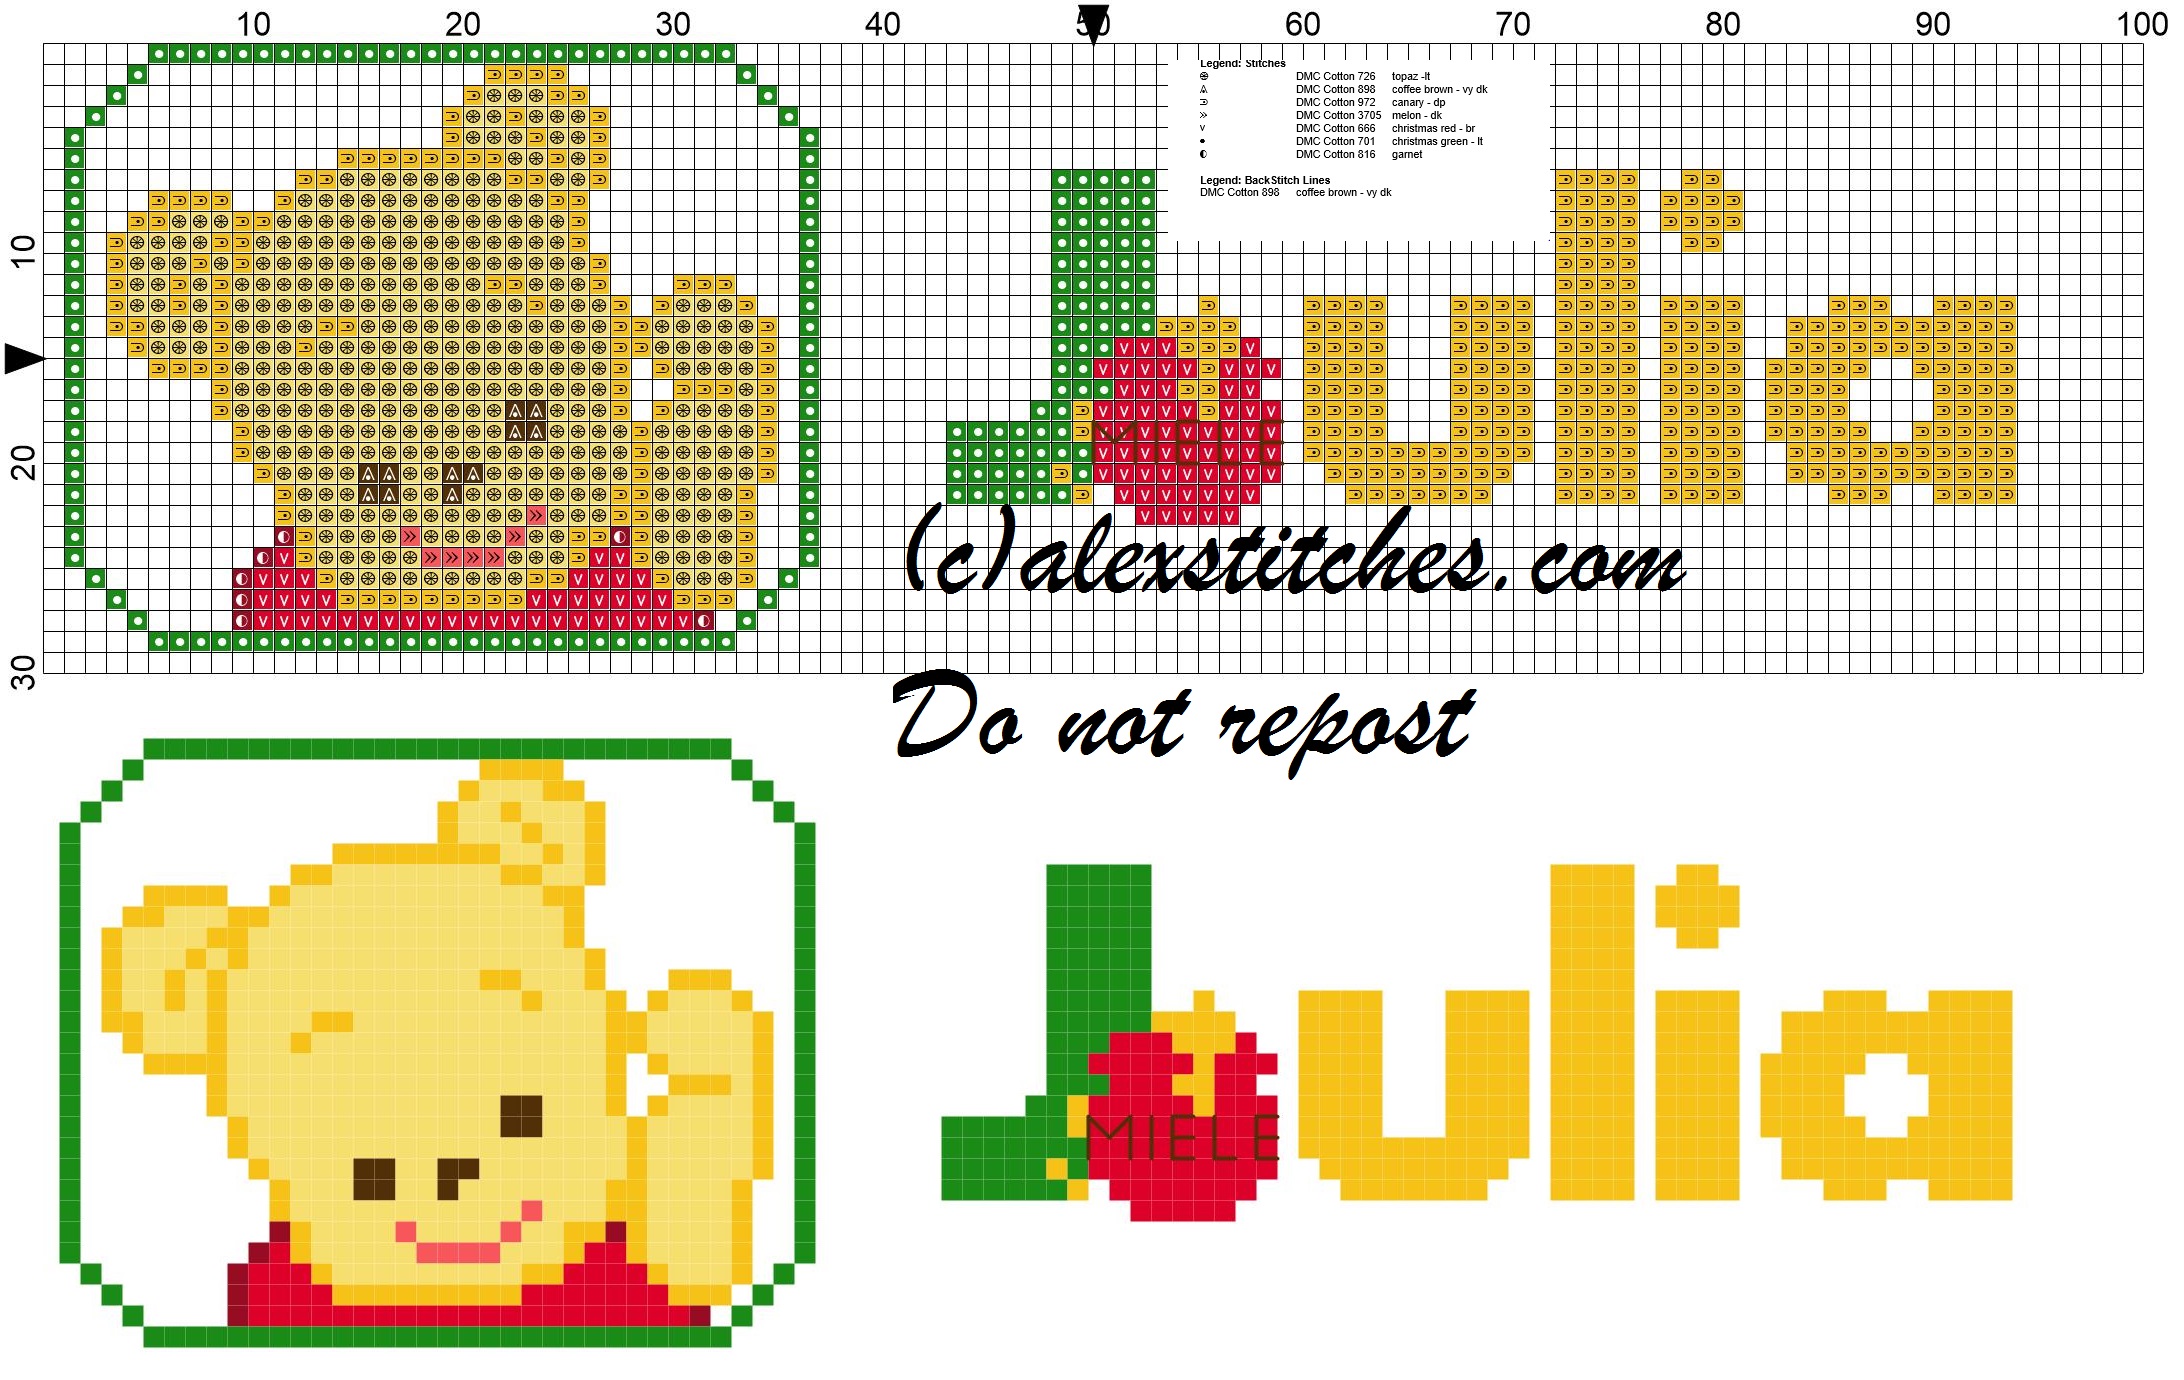 Julia name with Baby winnie the pooh free cross stitches pattern